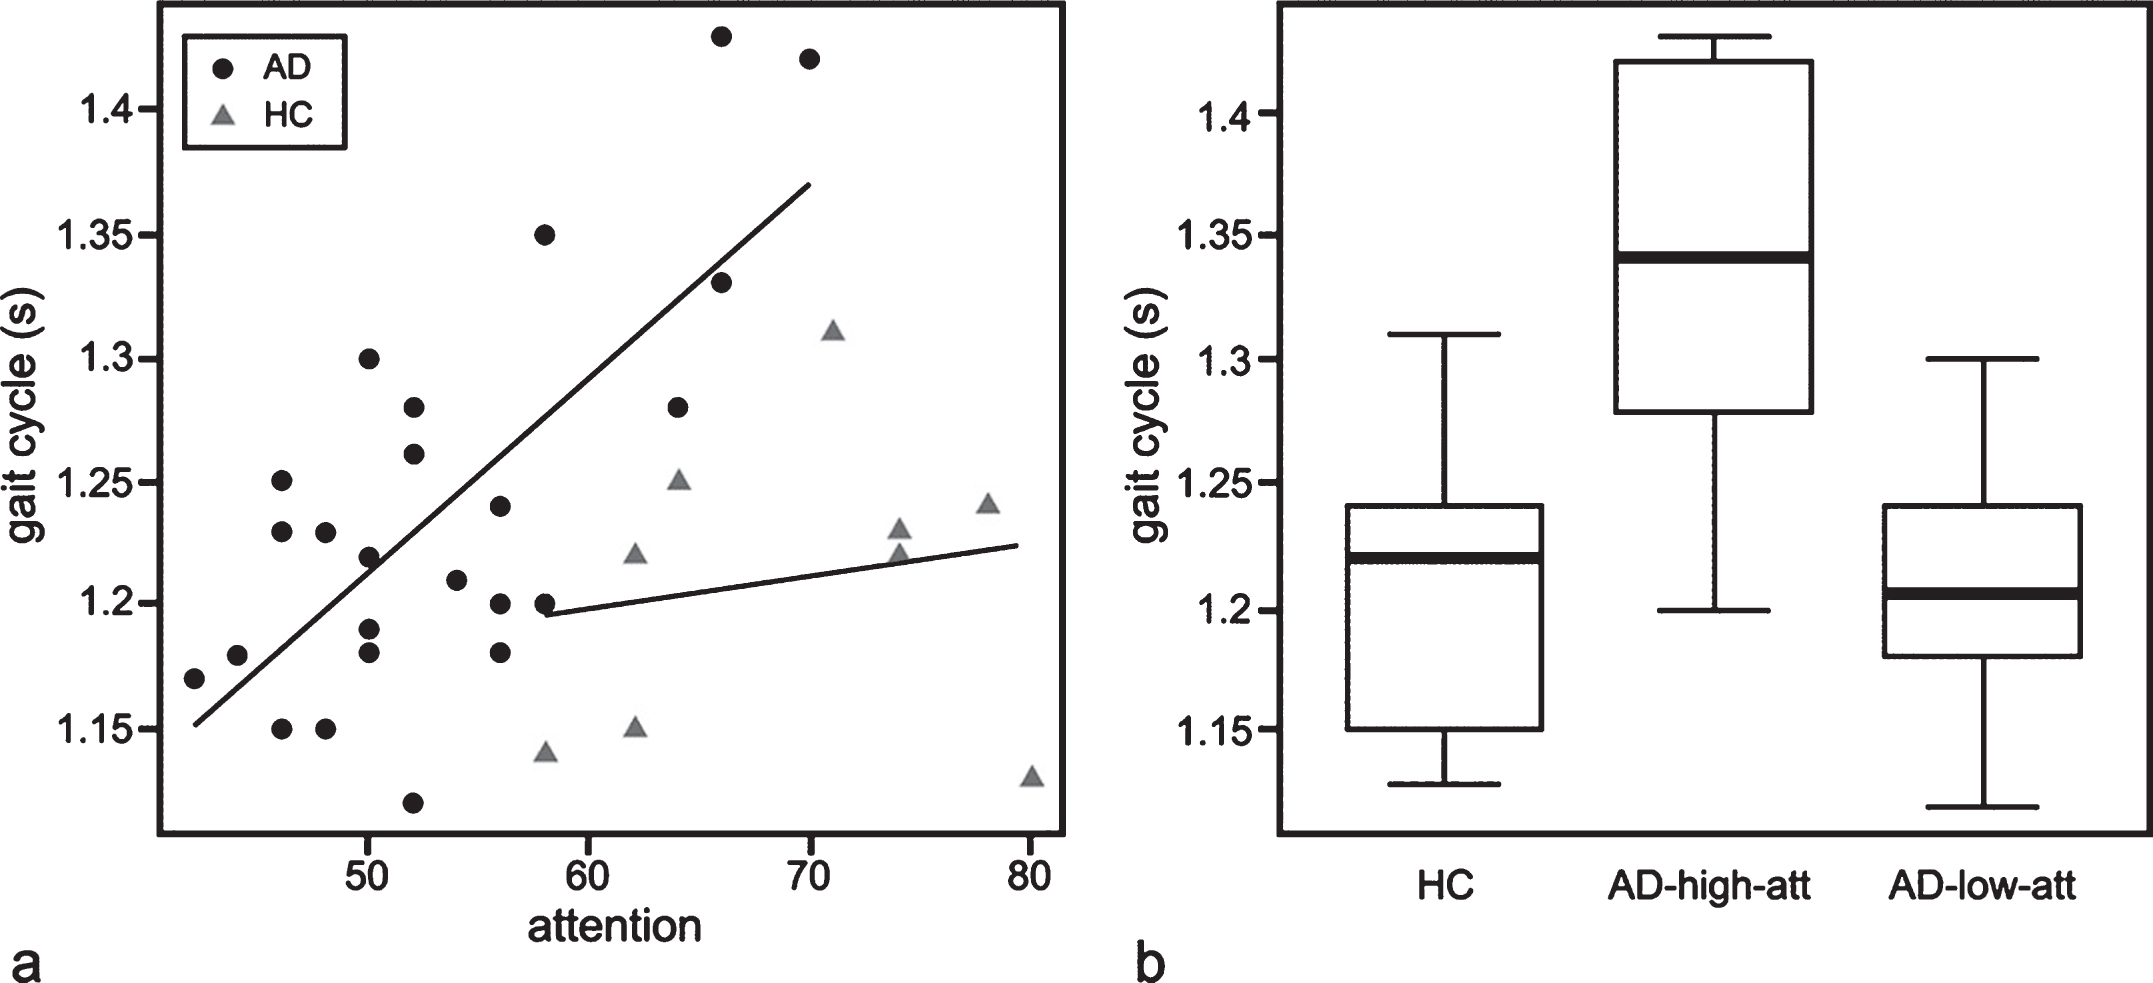 (a) Scatter plots indicating the relationship between attention/concentration and gait cycle in patients with AD and healthy controls. Gait cycle and attention/concentration was moderately correlated in patients with AD, but not correlated in HC (p = 0.101). The regression lines for AD (black line) and HC (gray line) are shown. (b) Boxplots showing a comparison of gait cycle between AD-high-att, AD-low-att, and HC. The parameters of these plots are the same as in Fig. 1.